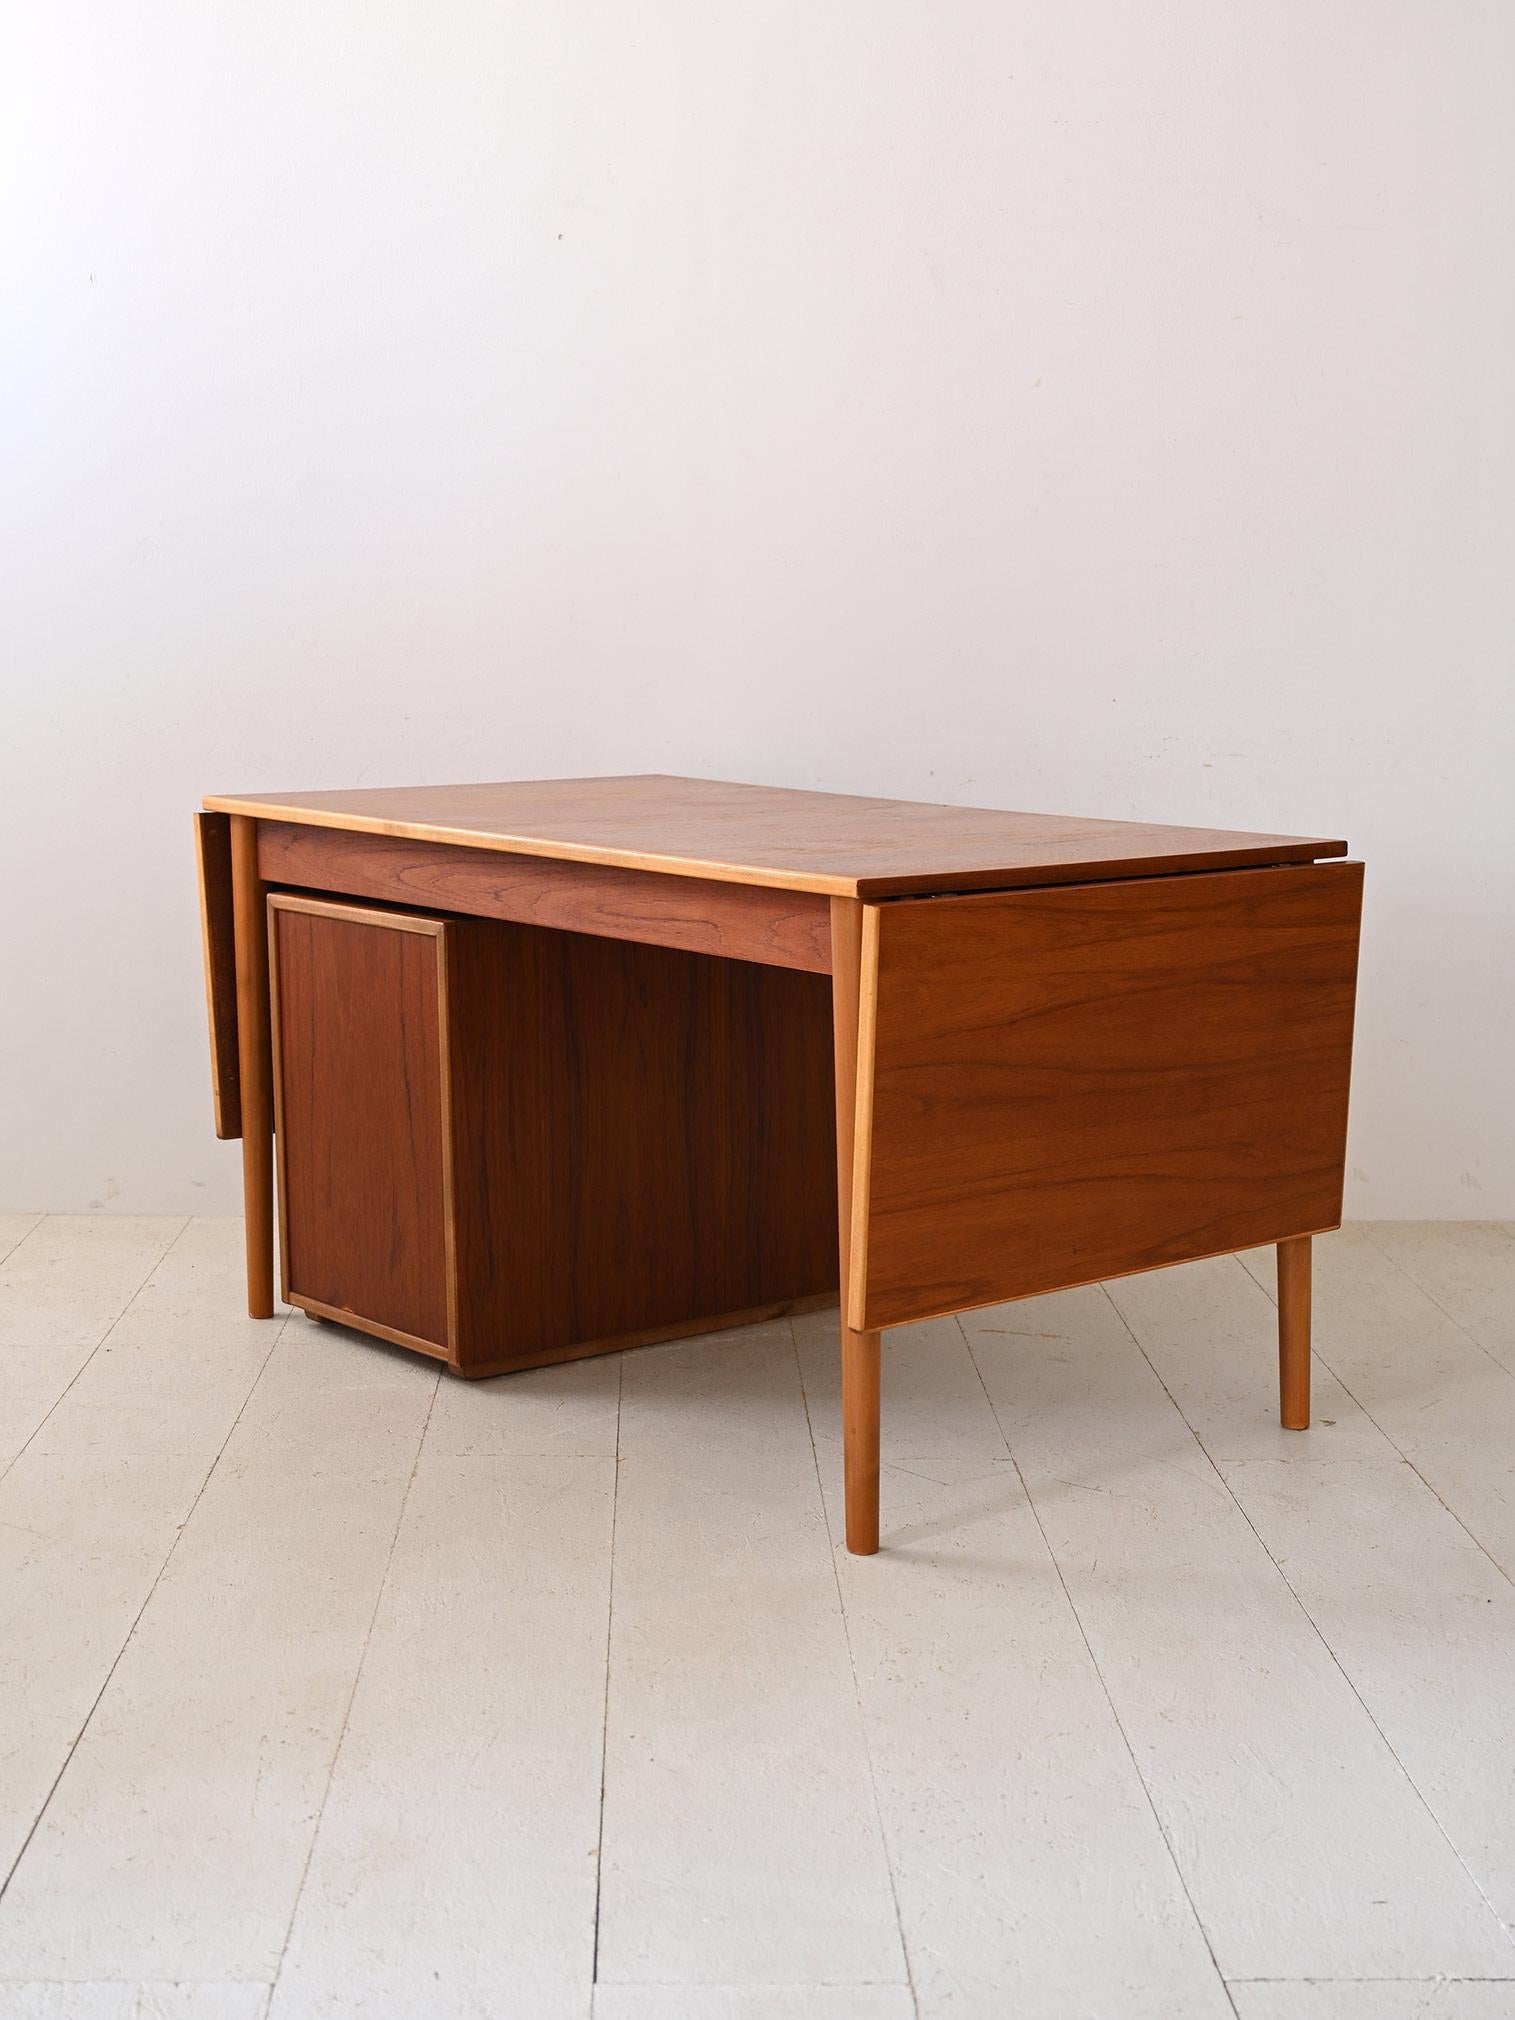 Retro desk by Nils Jonsson with drawers For Sale 1